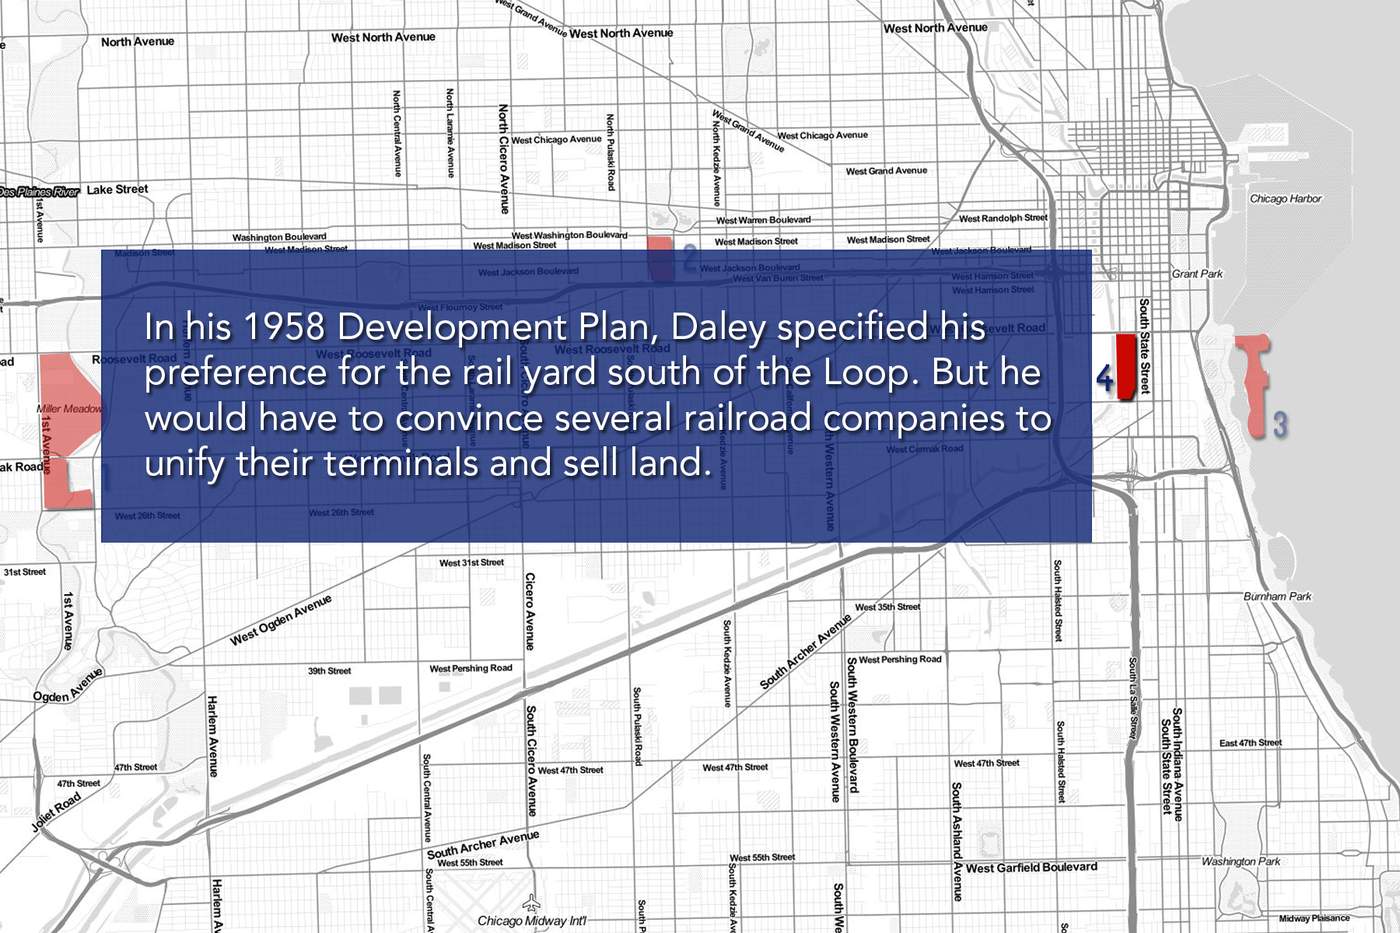 In his 1958 Development Plan, Daley specified his preference for the railyard south of the Loop. But he would have to convince several railroad companies to unify their terminals and sell the land.